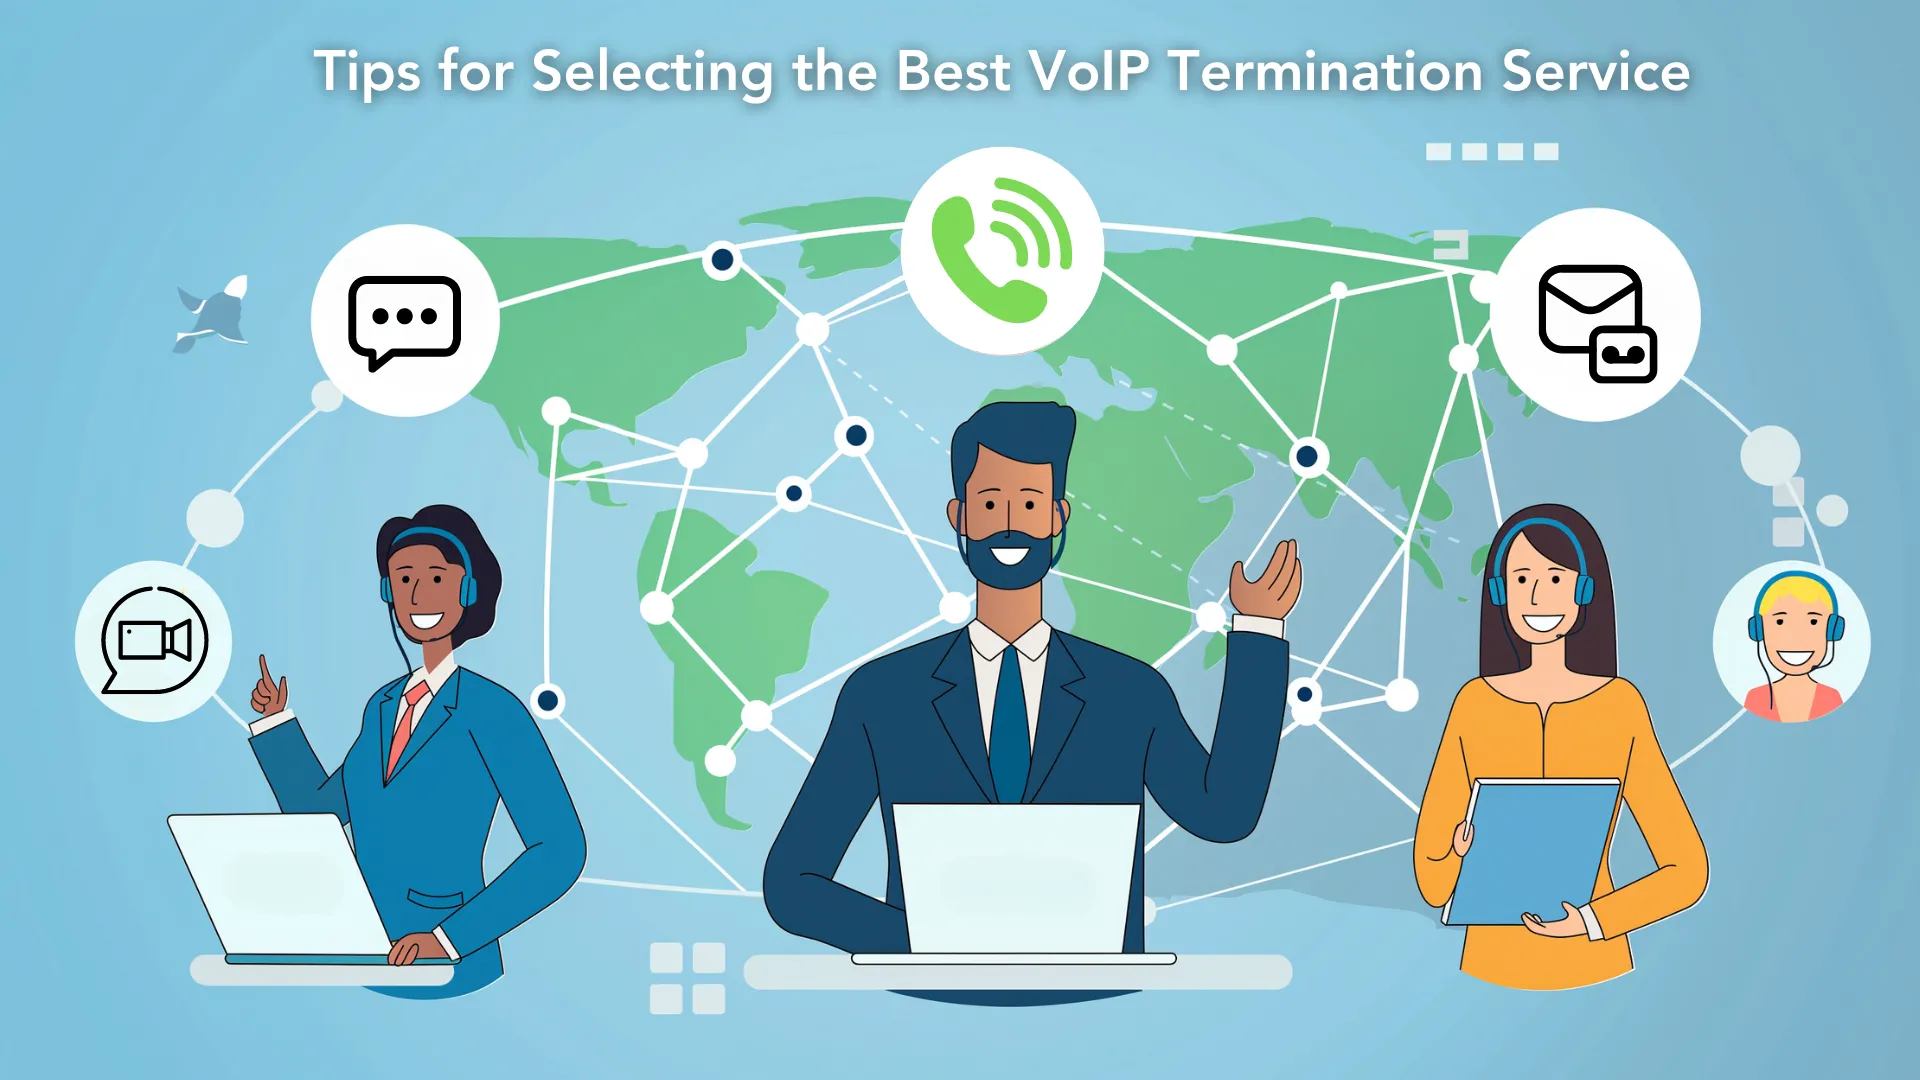 Top Tips for Selecting the Best VoIP Termination Service